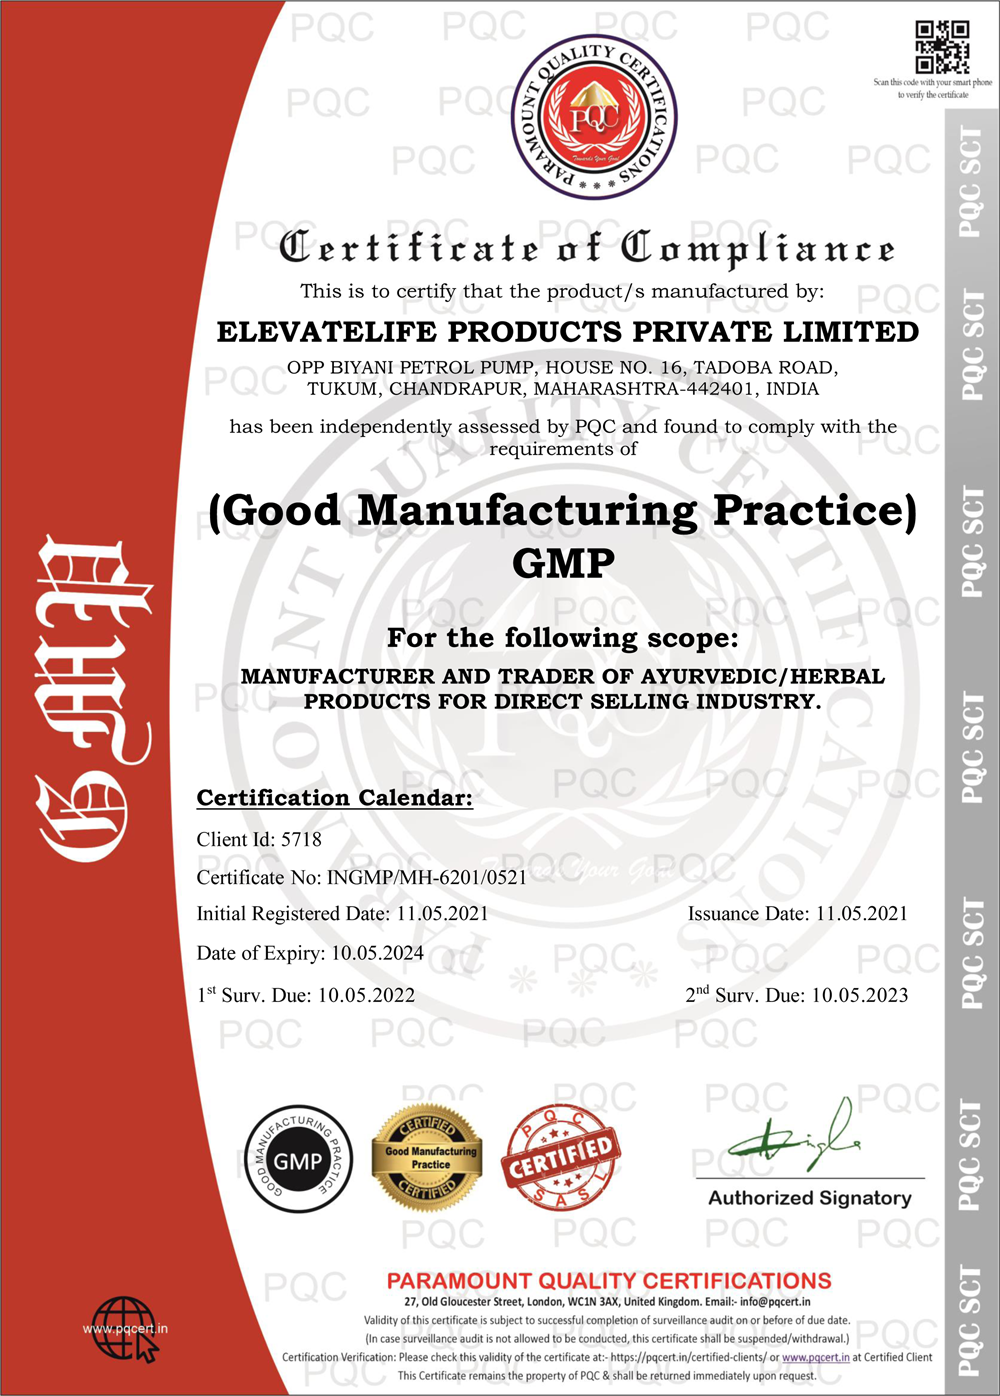 Certificate of Good Manufacturing Practice